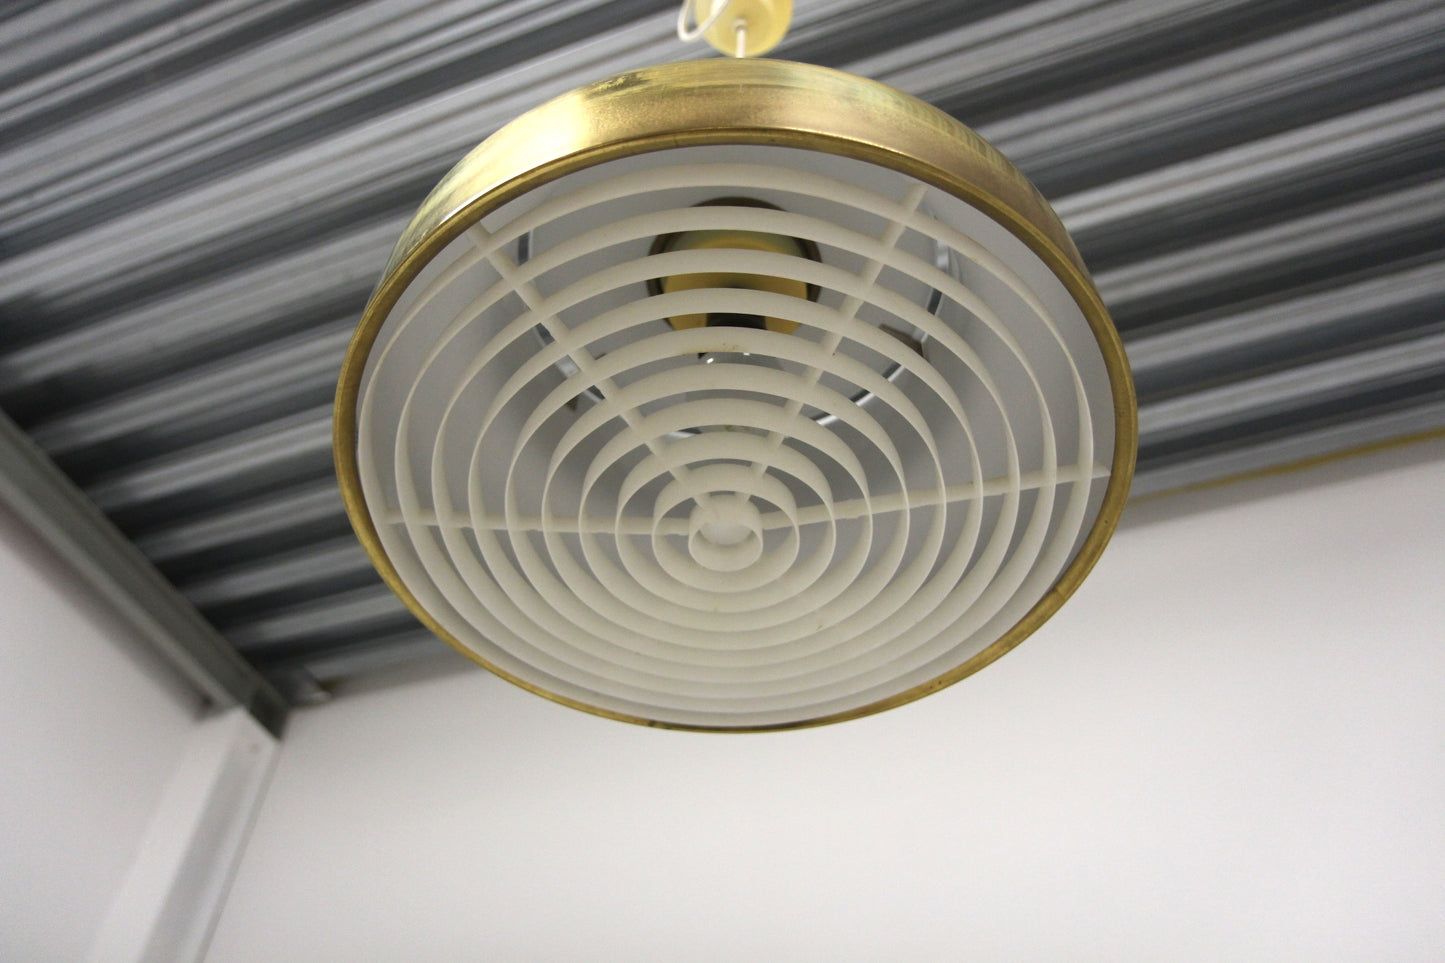 Lampada a sospensione "Bumling M.240P/400" Anders Pehrsson design svedese vintage anni 60 [sw23028]